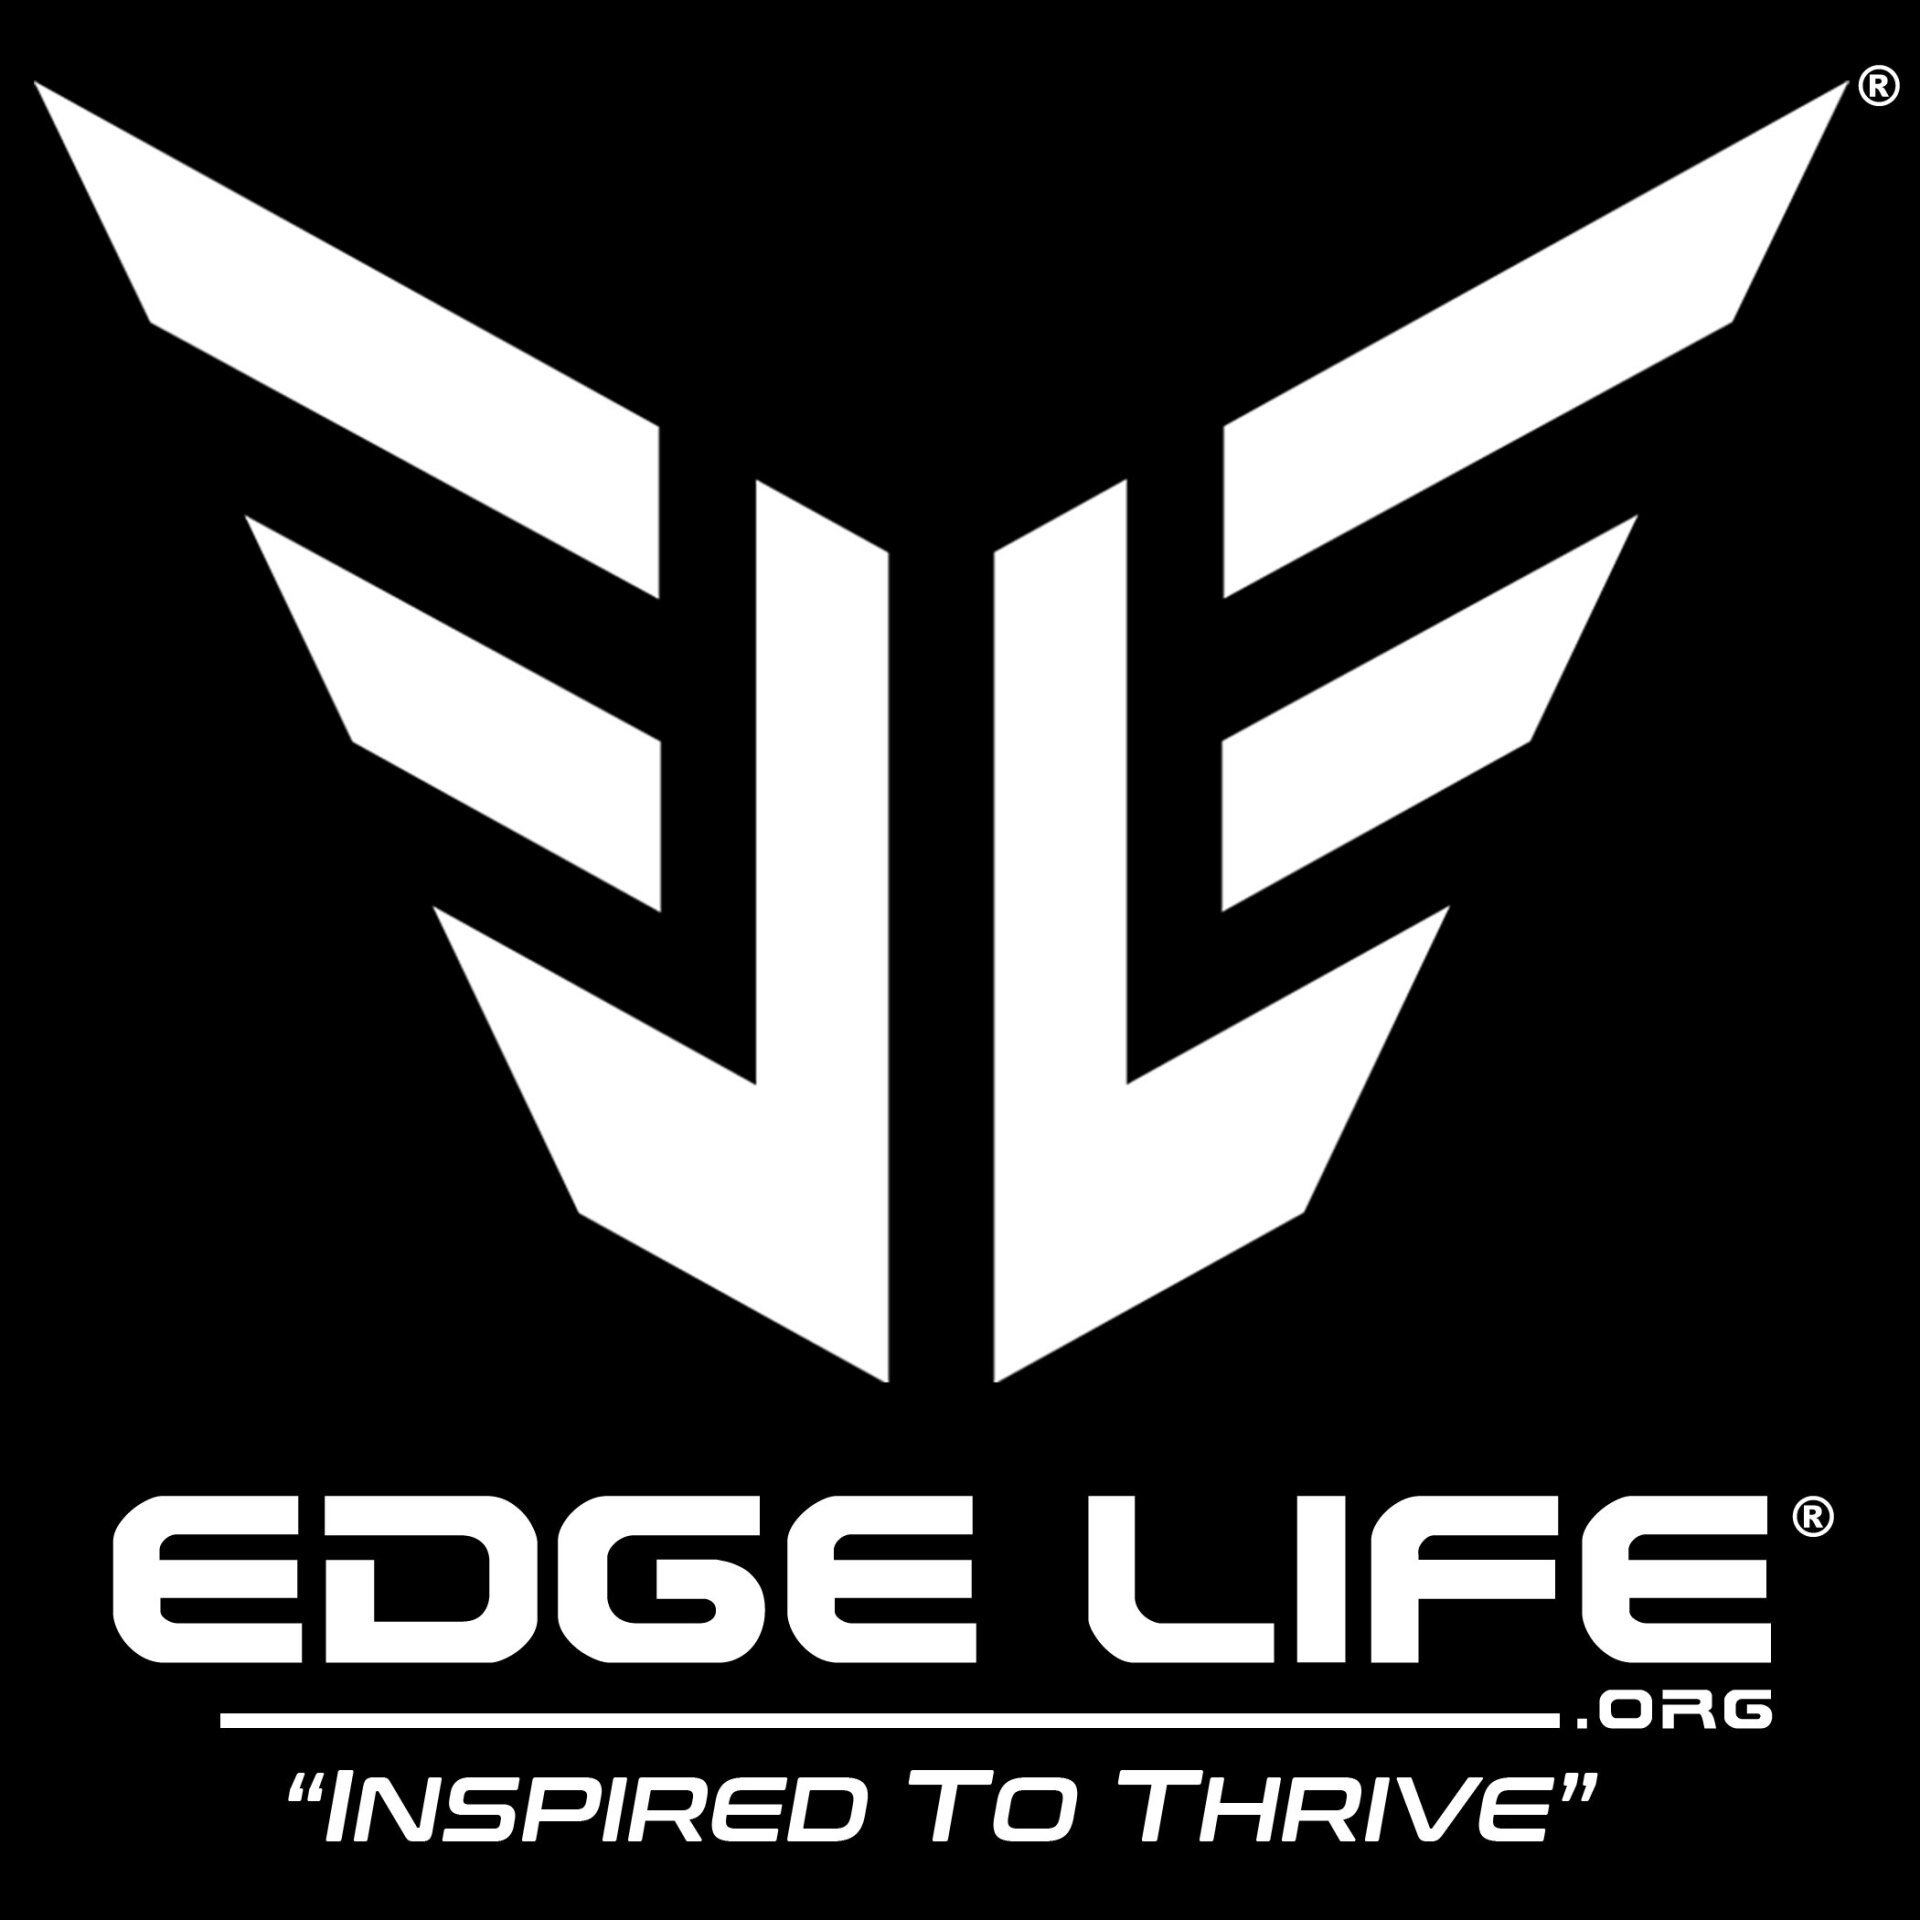 Knowing the Heart of Edge Life